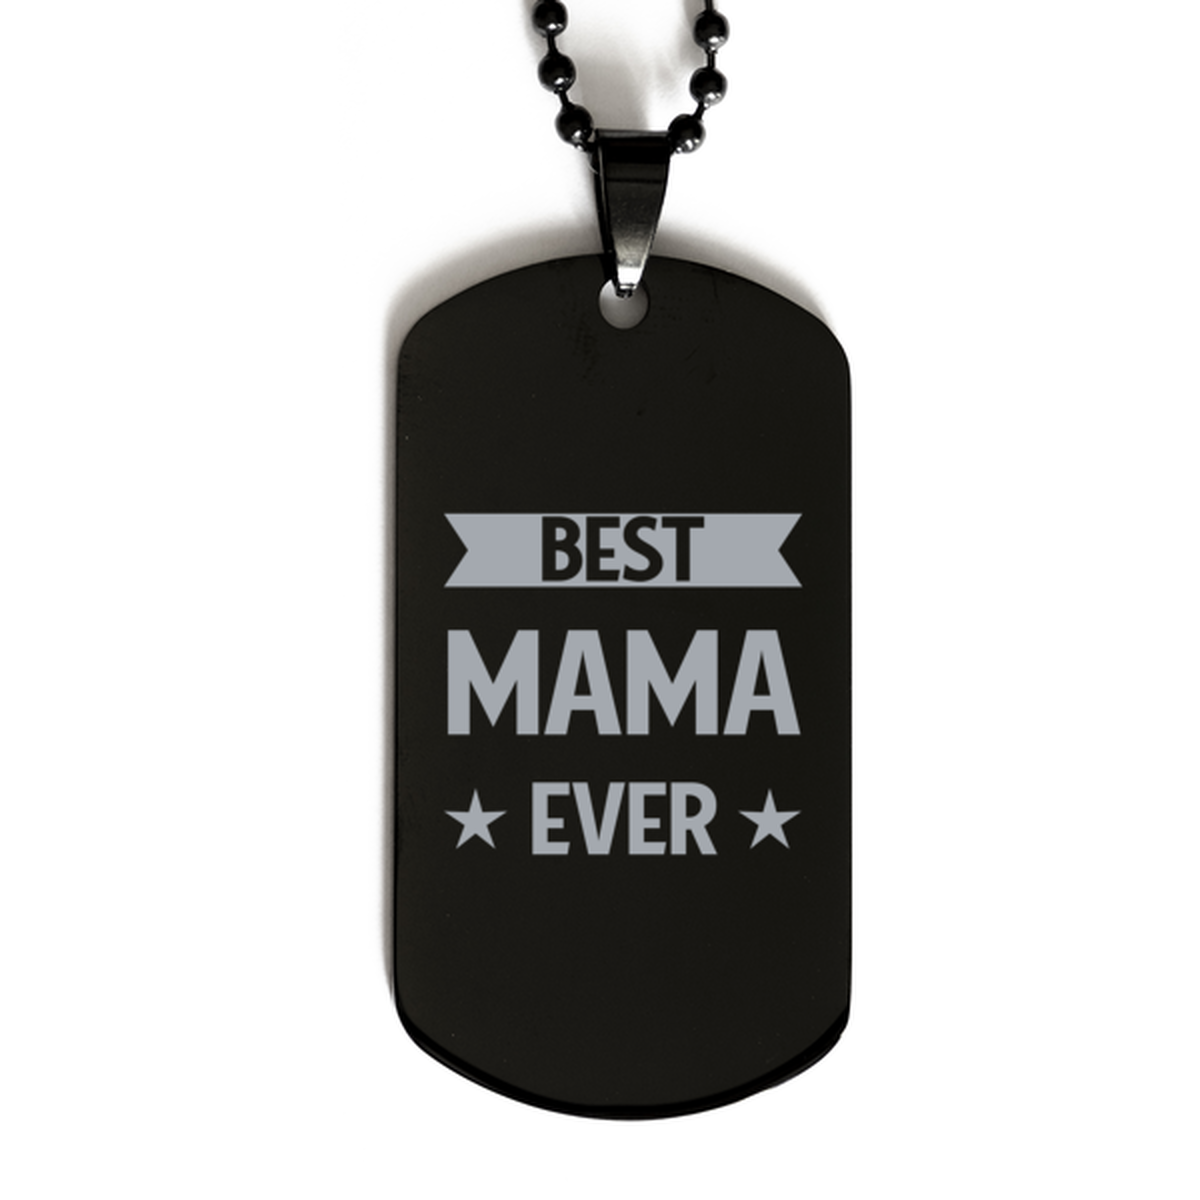 Best Mama Ever Mama Gifts, Funny Black Dog Tag For Mama, Birthday Family Presents Engraved Necklace For Women